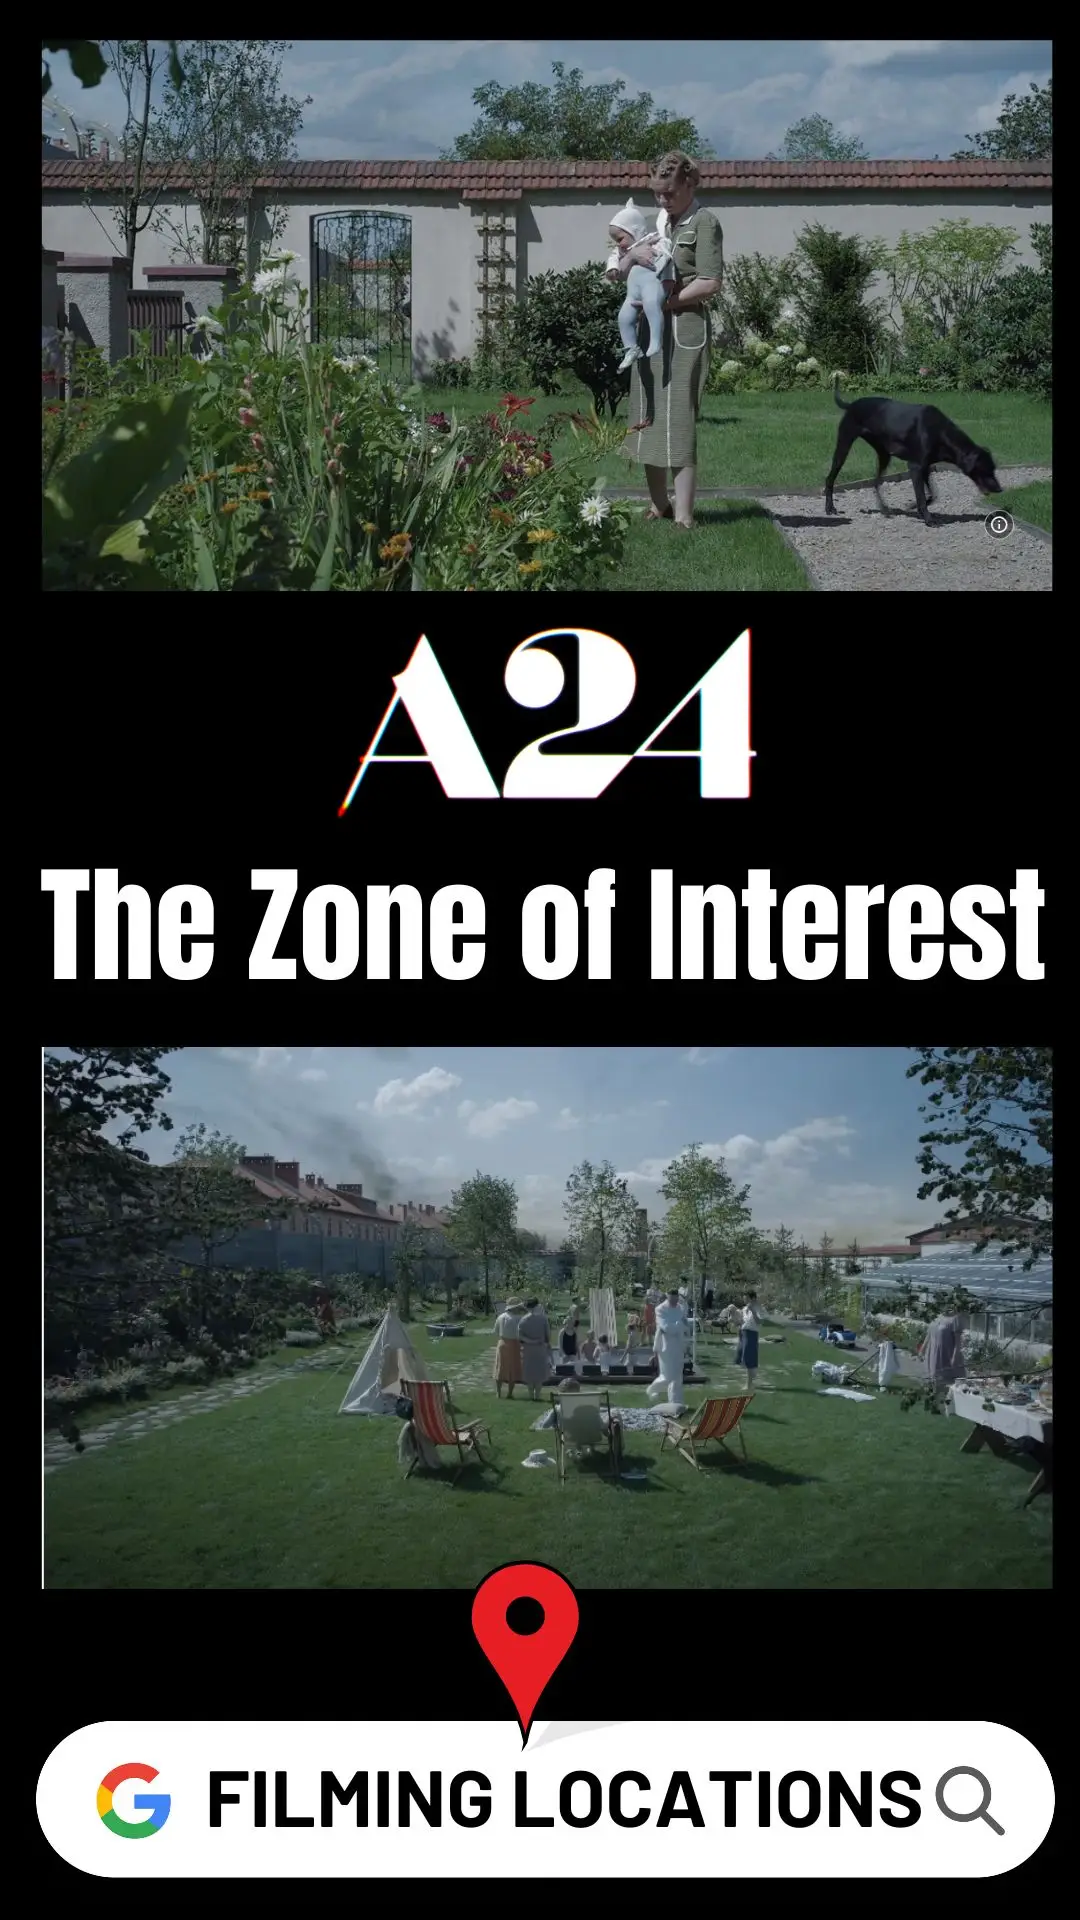 The Zone of Interest Filming Locations